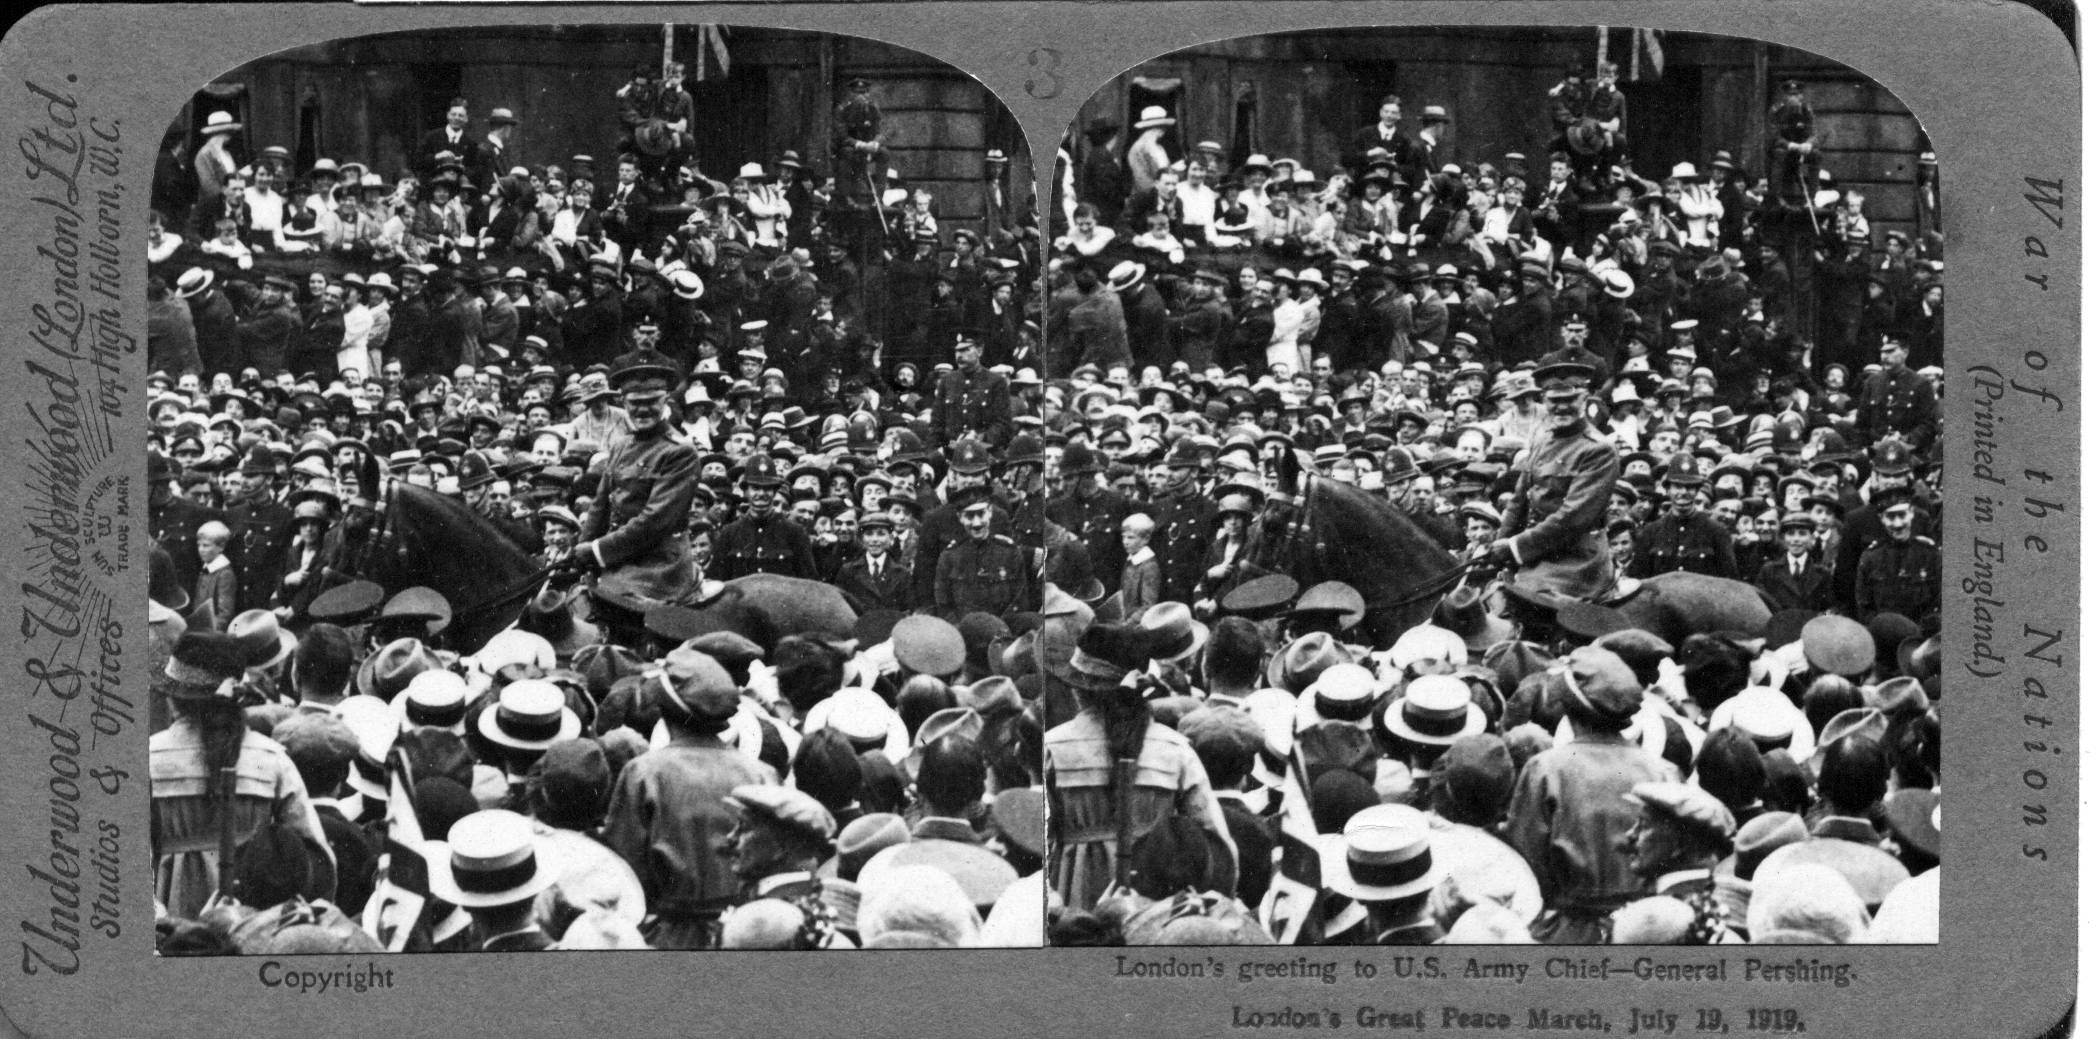 London's greeting to U.S. Army Chief--General Pershing. London's Great Peace March July 19, 1919